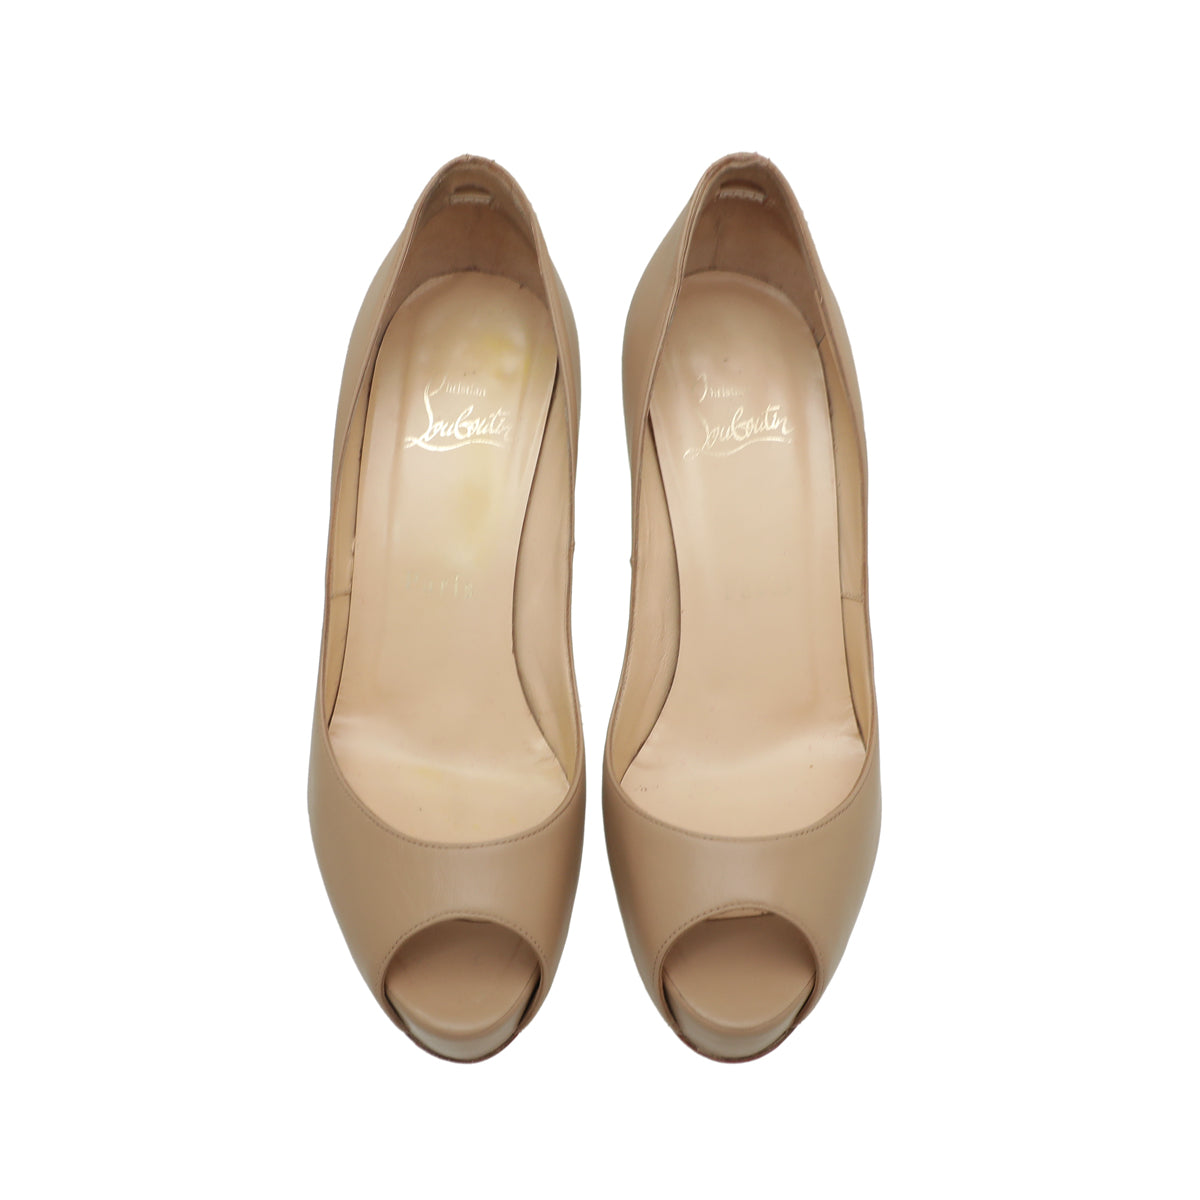 Christian Louboutin Nude Very Prive 100 Pumps 36.5